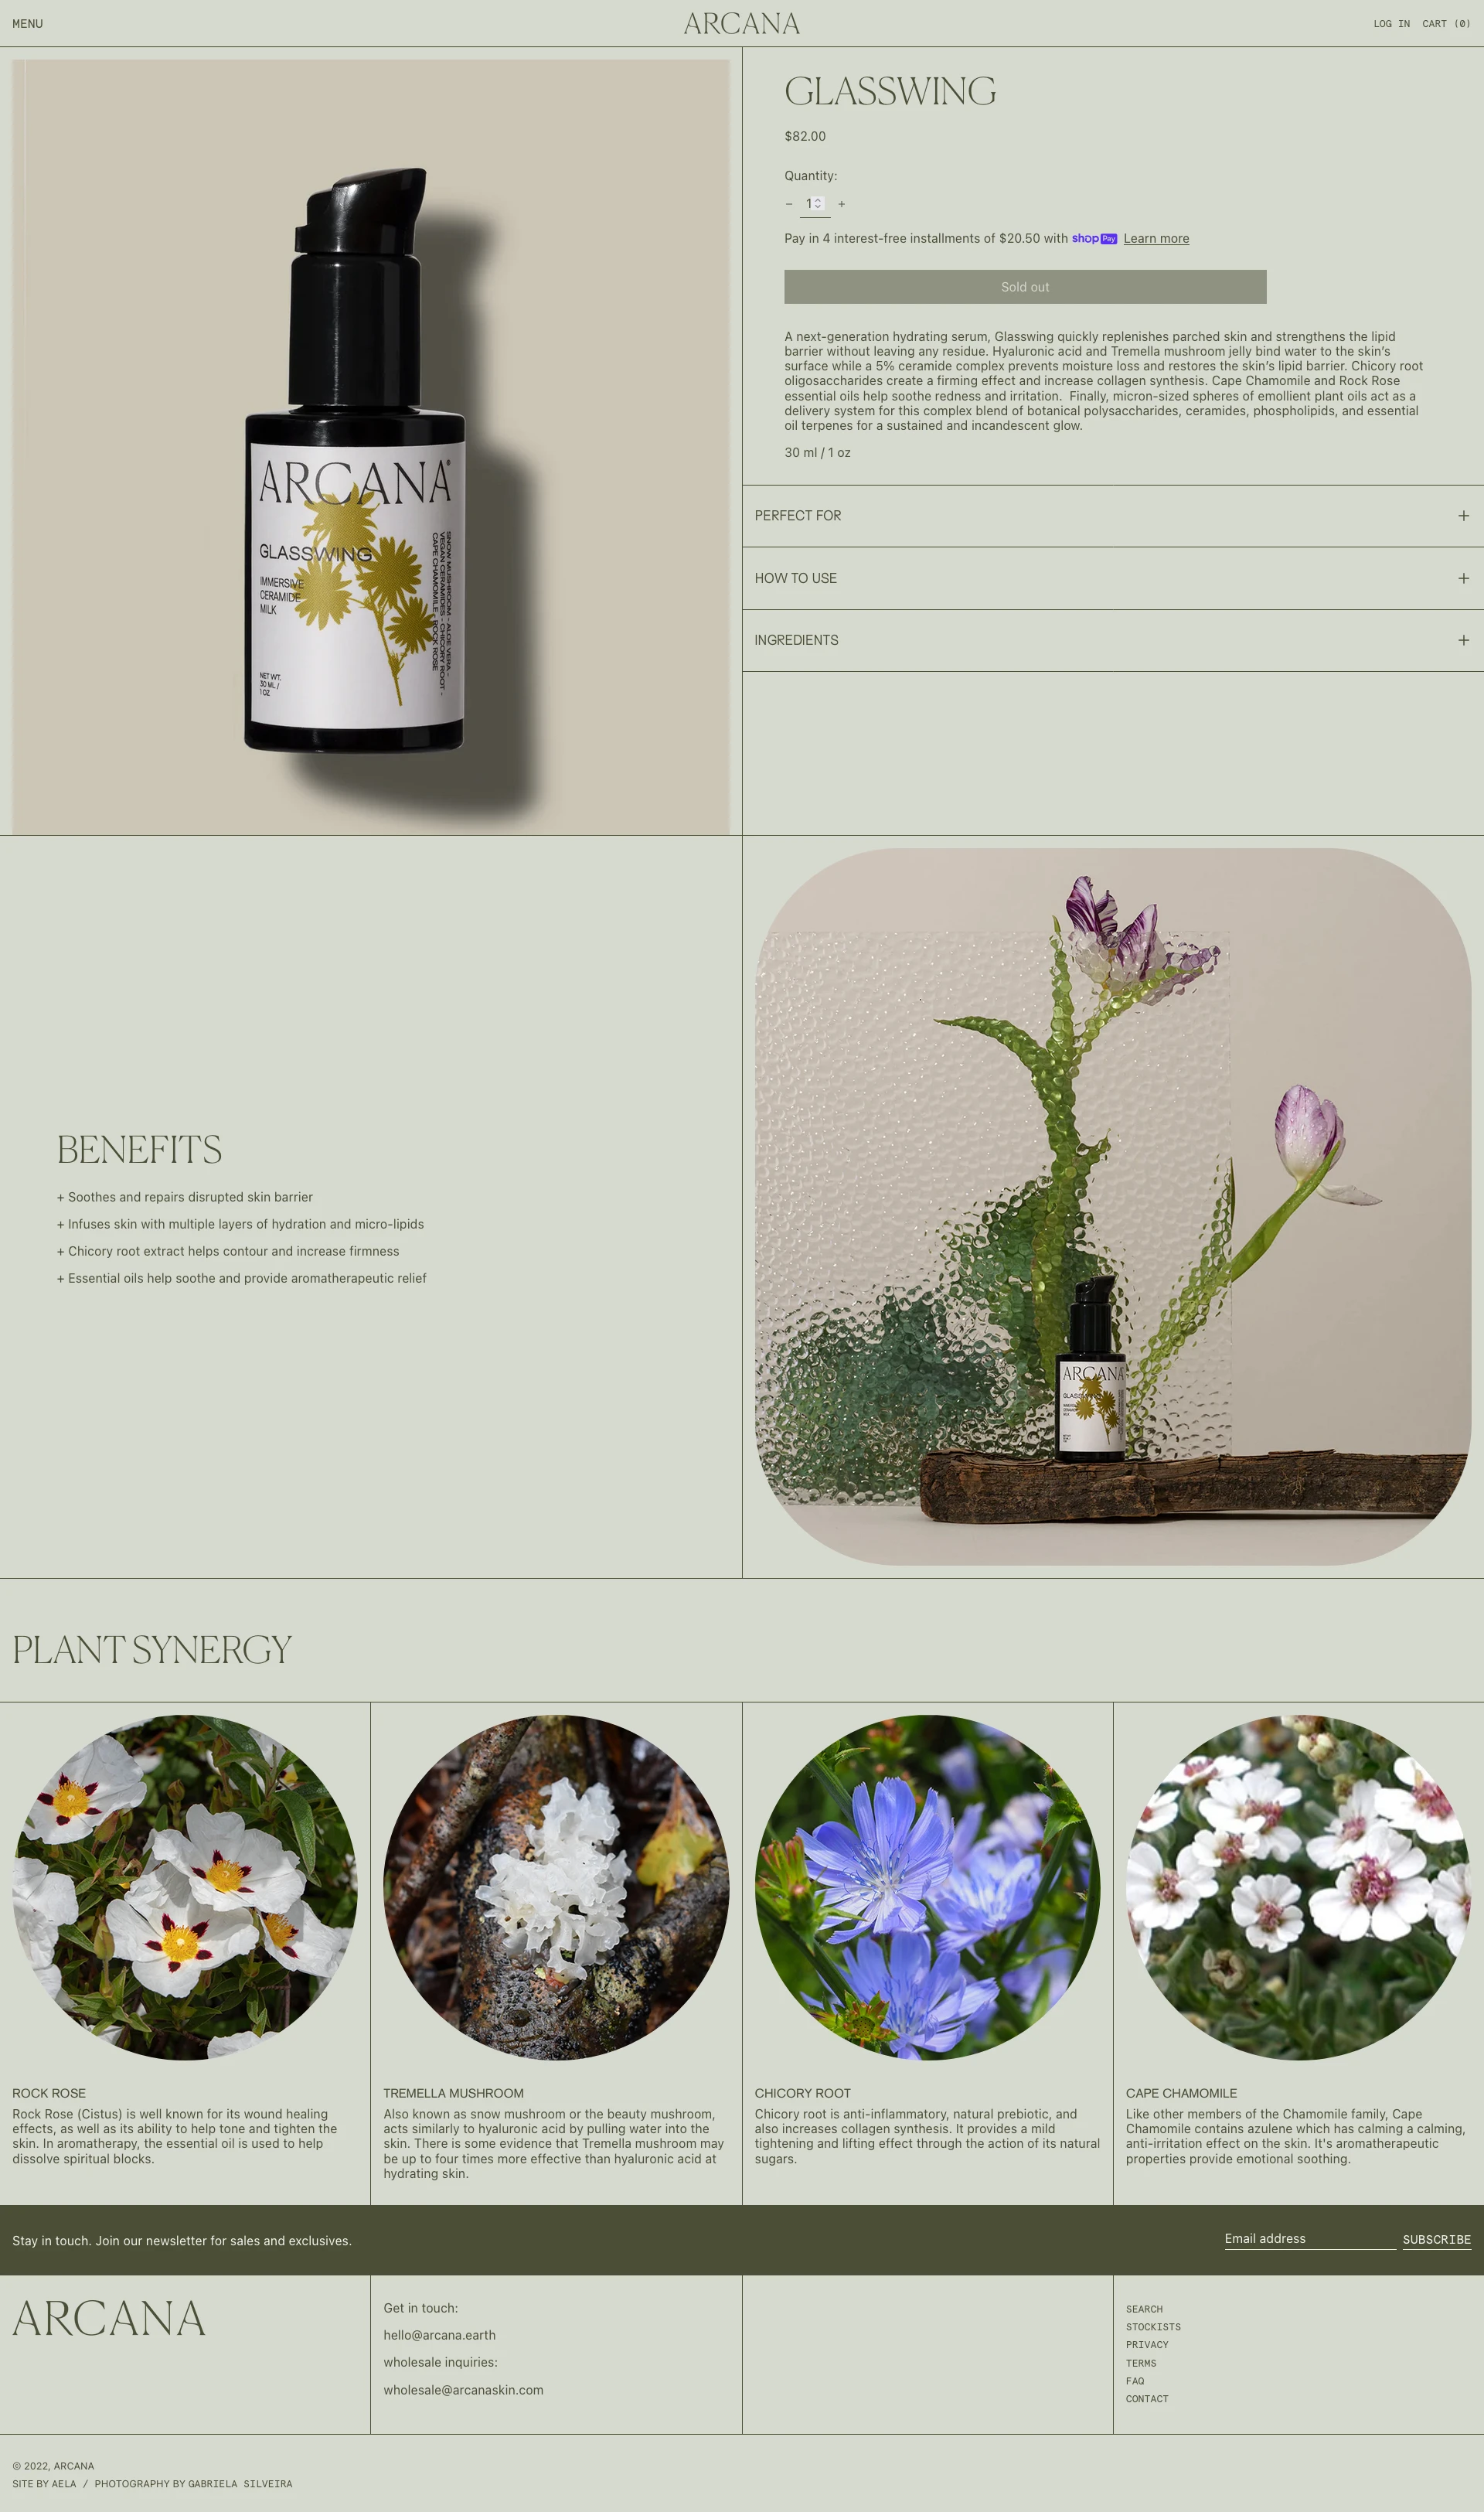 Arcana Landing Page Example: We craft skincare using the most exquisite ingredients from the earth, plant, and mineral realms.